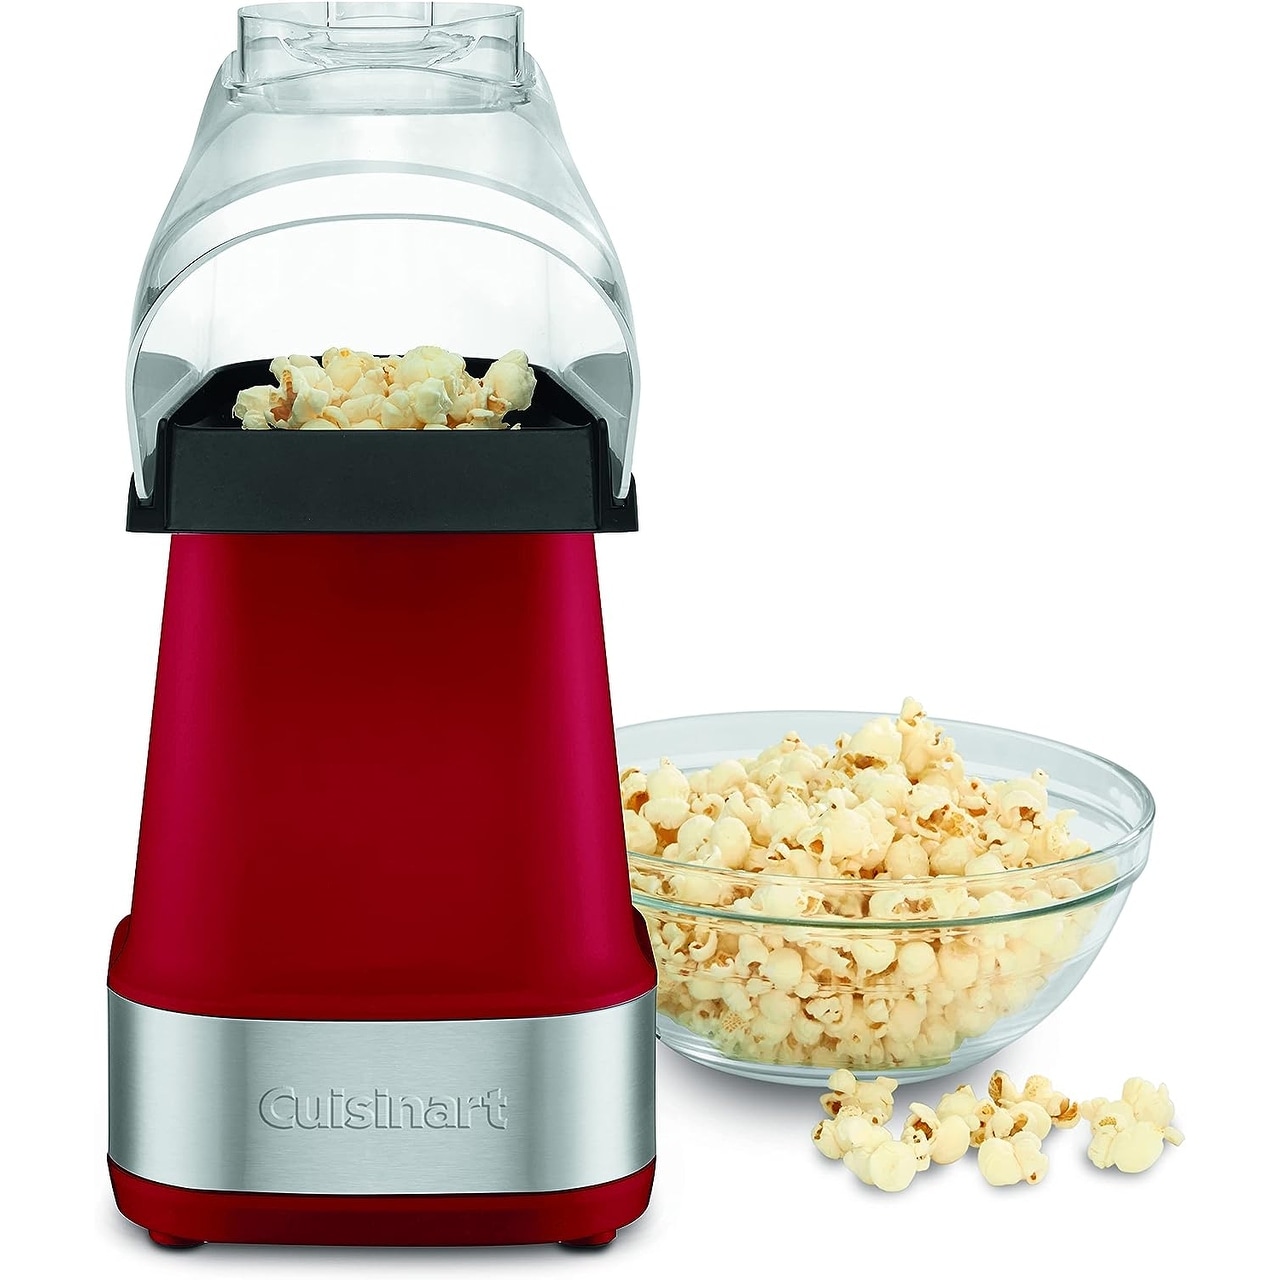 https://ak1.ostkcdn.com/images/products/is/images/direct/c501d4933b3819444361565bfea79dff60678459/Cuisinart-EasyPop-Hot-Air-Popcorn-Maker-%28Red%29.jpg